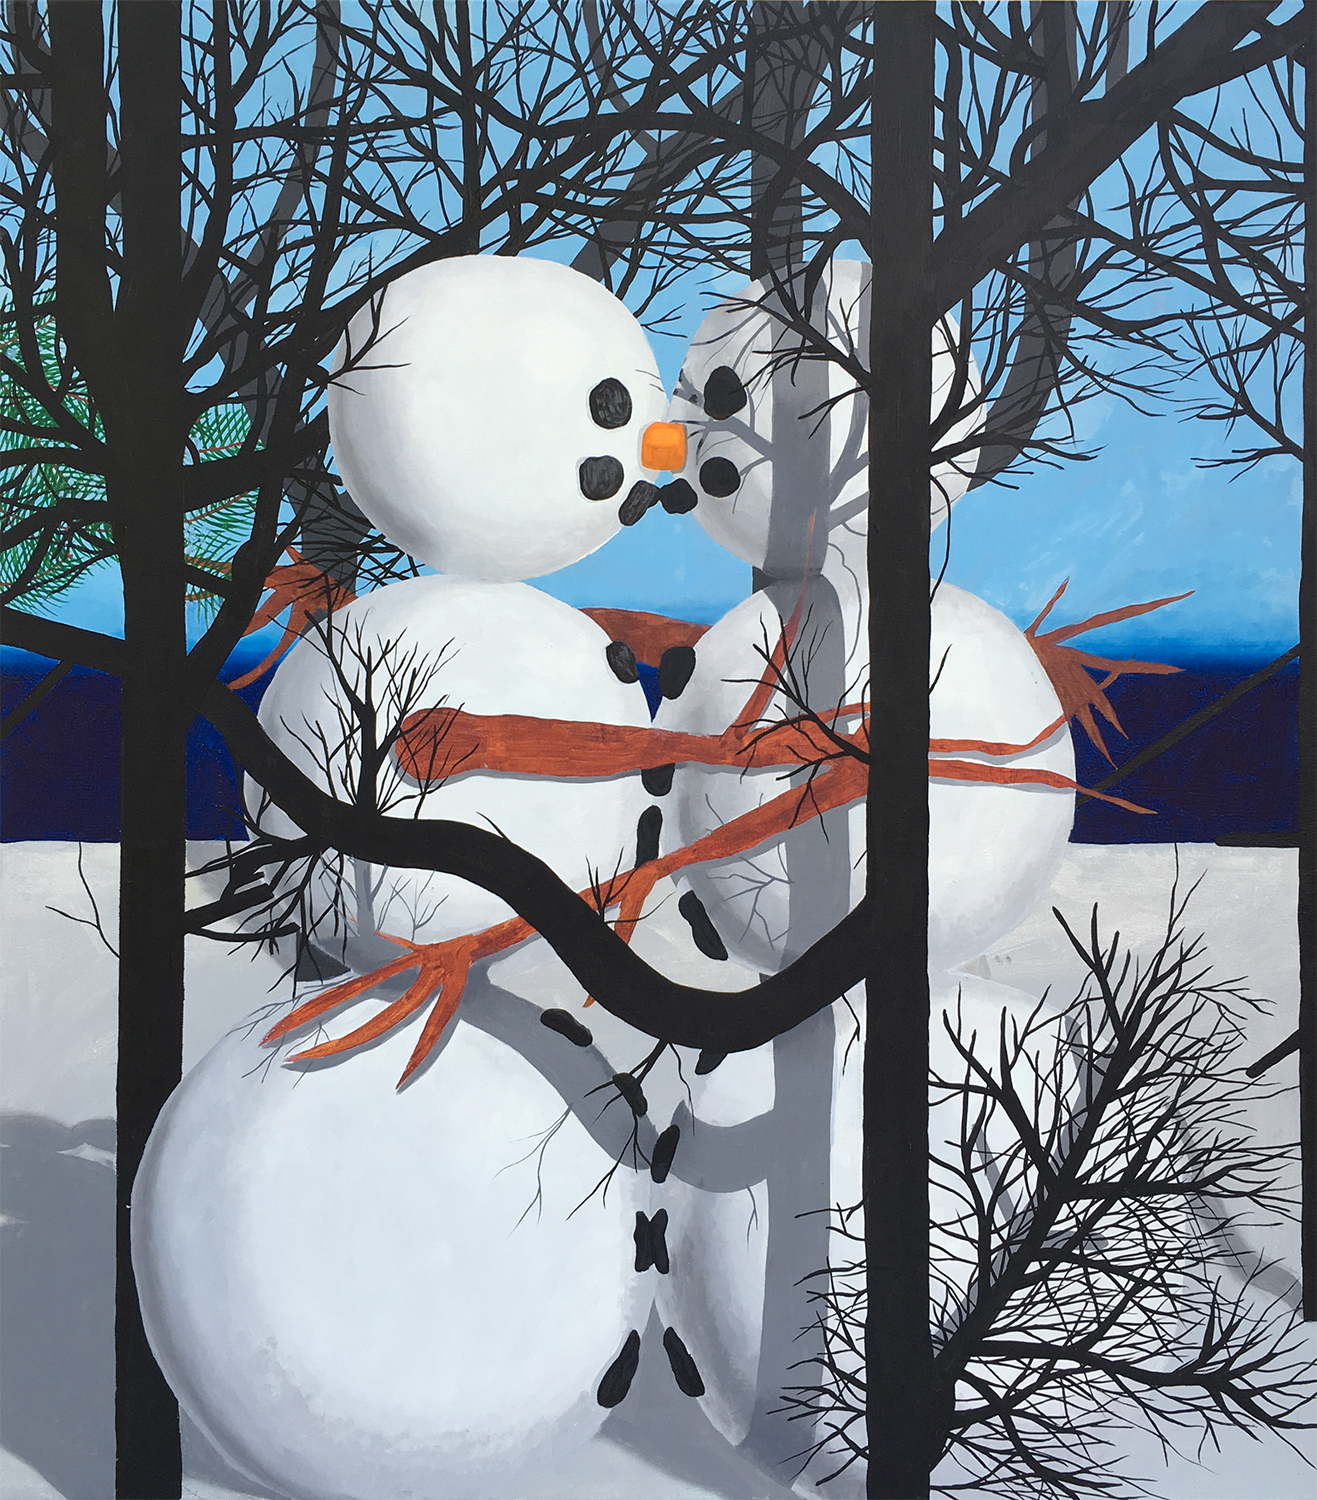   Double Snowman   32 x 34 inches  Oil on Canvas  2016 